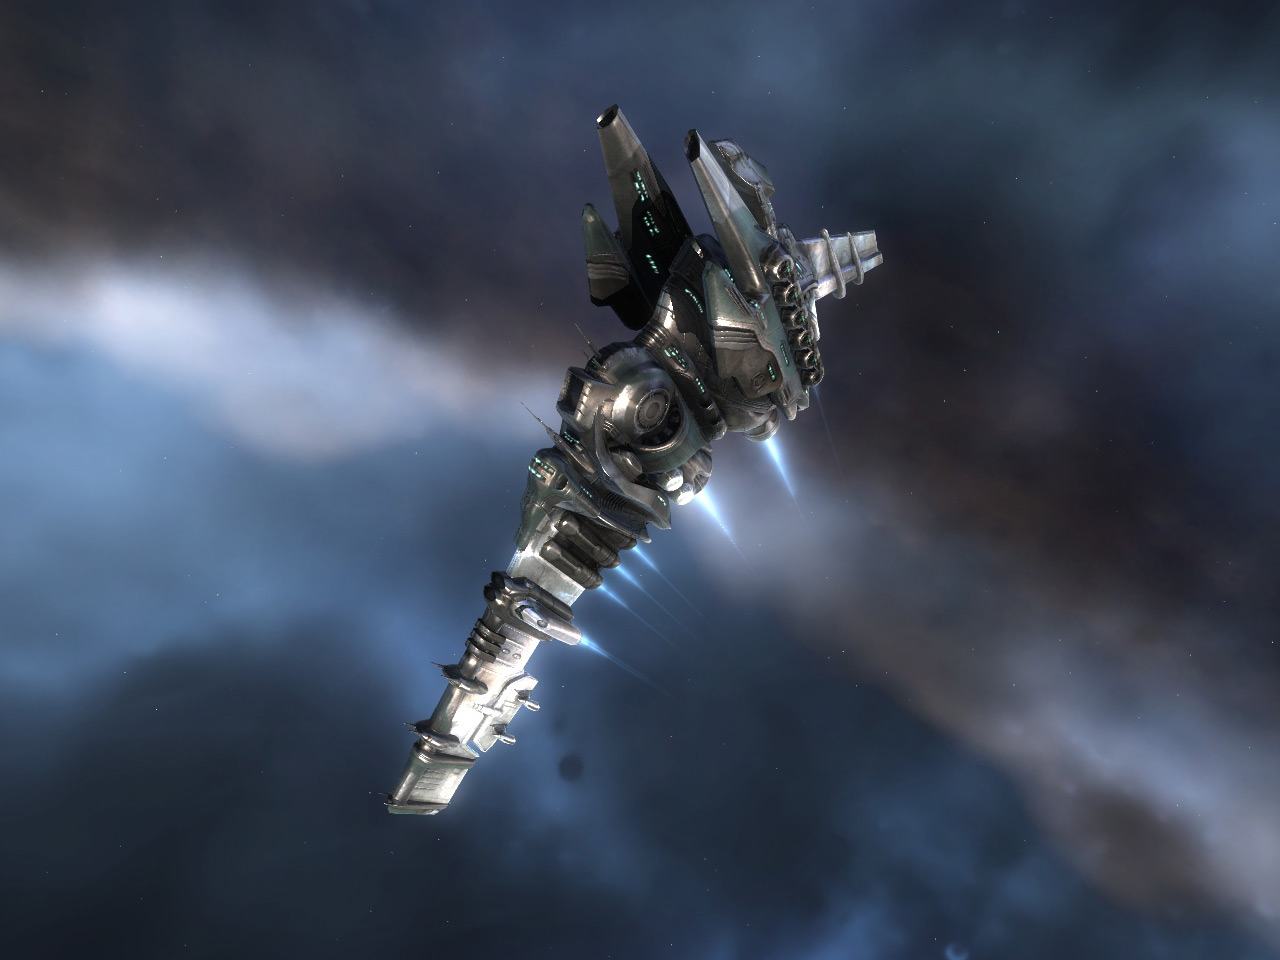 eve online mining guide for 0.5 space